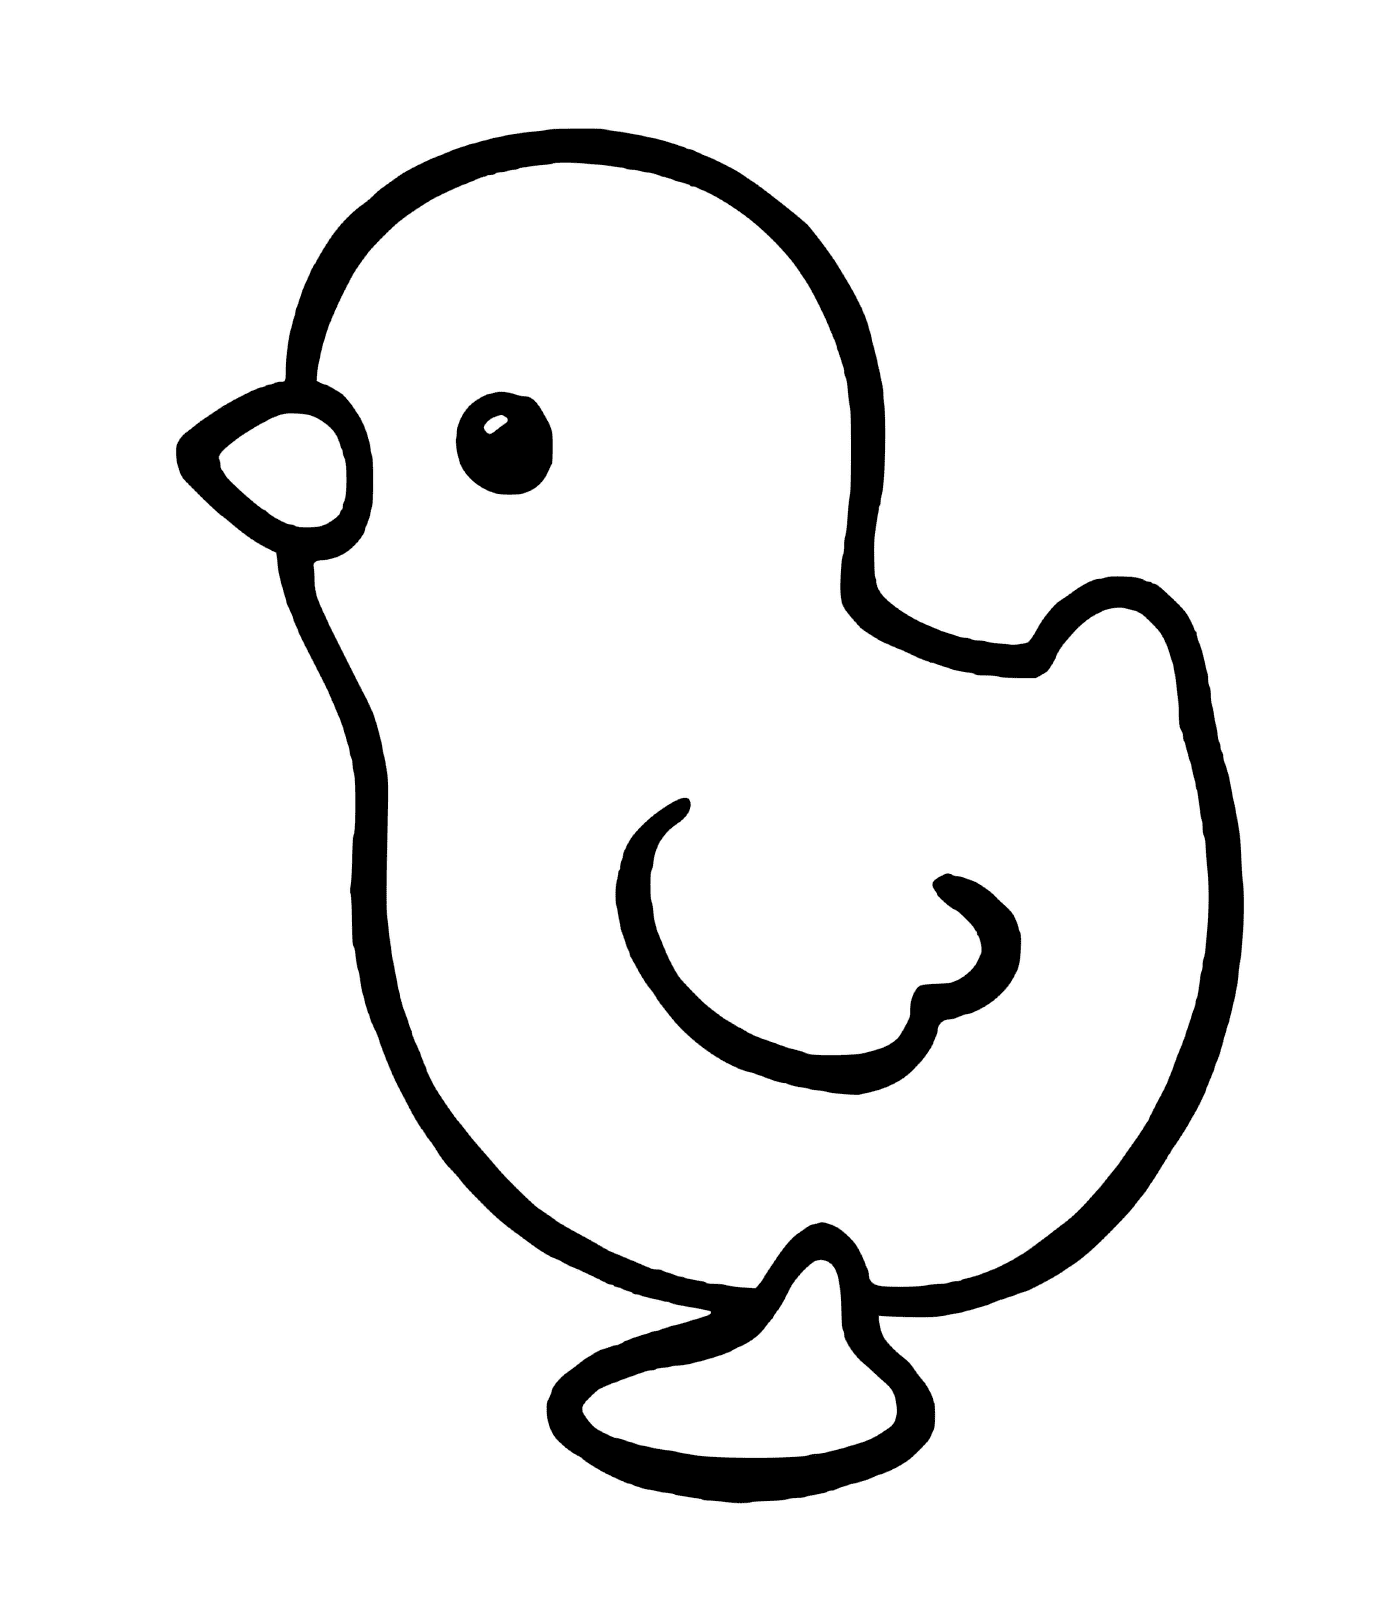  Cute chick easy drawing 